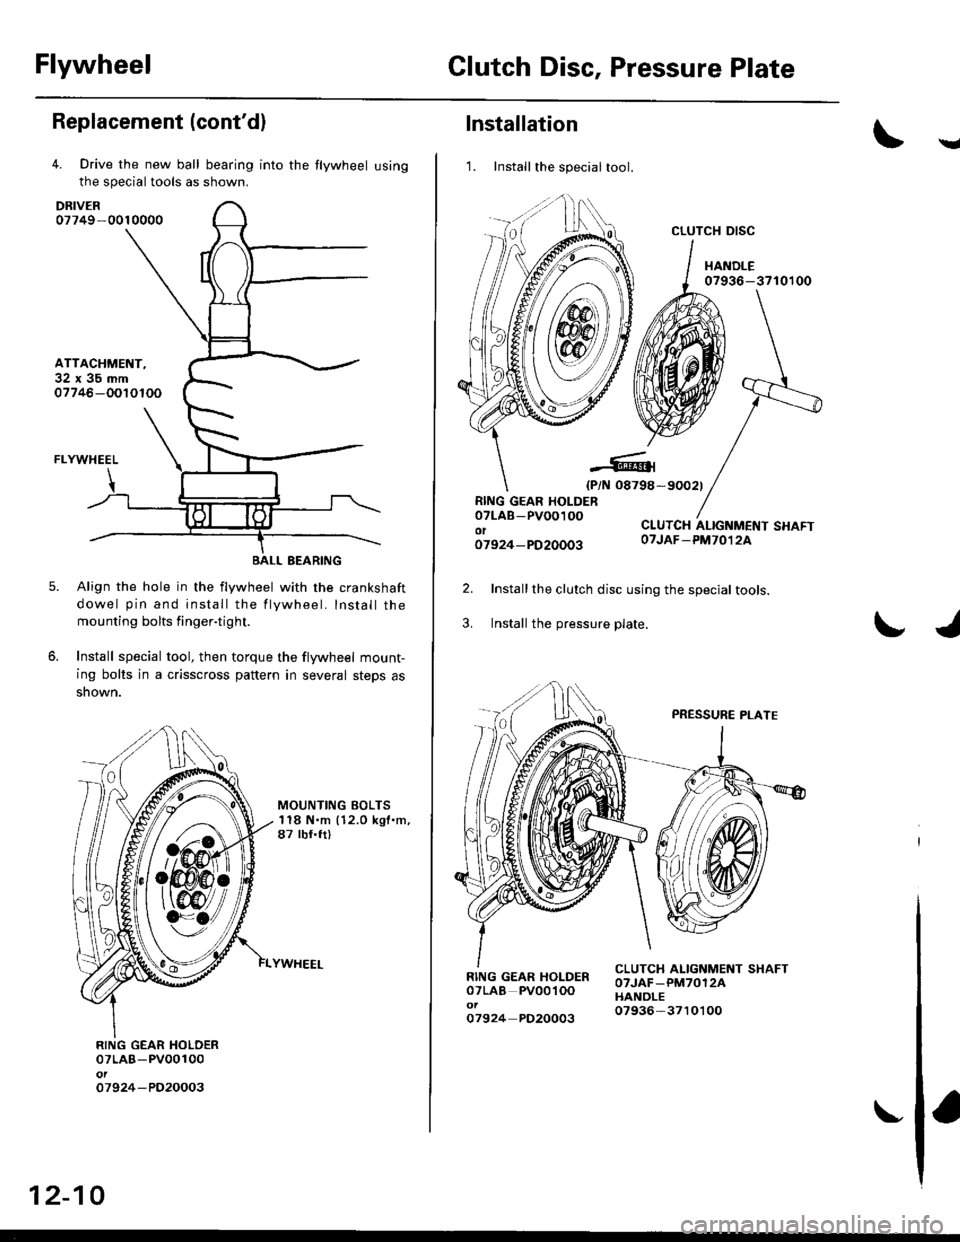 HONDA CIVIC 1999 6.G Workshop Manual FlywheelClutch Disc, Pressure Plate
Replacement (contdl
4. Drive the new ball bearing into the flywheel using
the special tools as shown.
DRIVER07749-0010000
ATTACHMENT,32x35mm07746-OOIOTOO
FLYWHEEL
